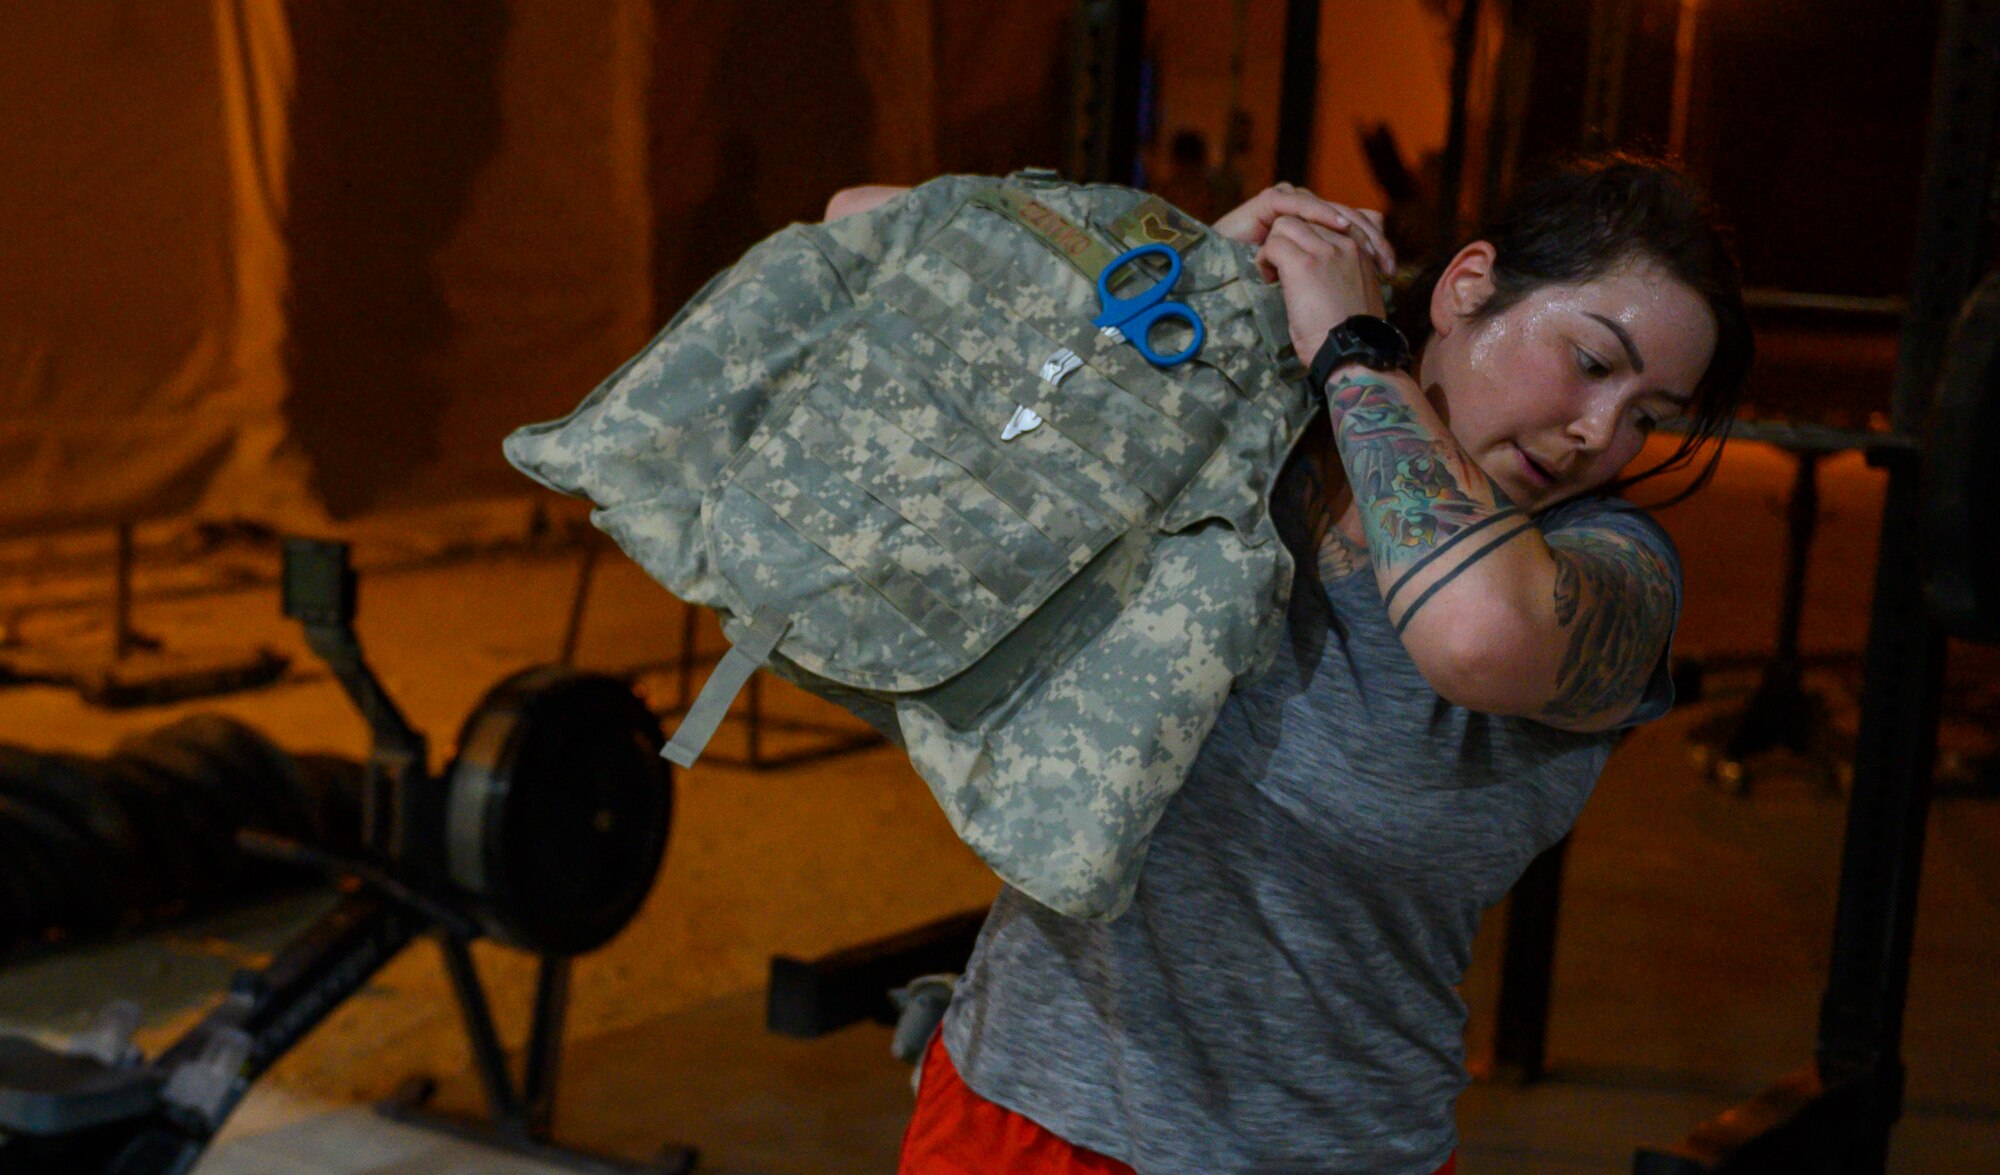 U.S. Air Force Staff Sgt. Kelly Dzitko, 378th Expeditionary Medical Squadron respiratory therapist, puts on personal protection equipment during the first best medic competition at Prince Sultan Air Base, June 21, 2021.  The competition was a culmination of the past 11 weeks of combat medicine training, testing their ability to provide care in unexpected situations.  (U.S. Air Force photo by Senior Airman Samuel Earick)